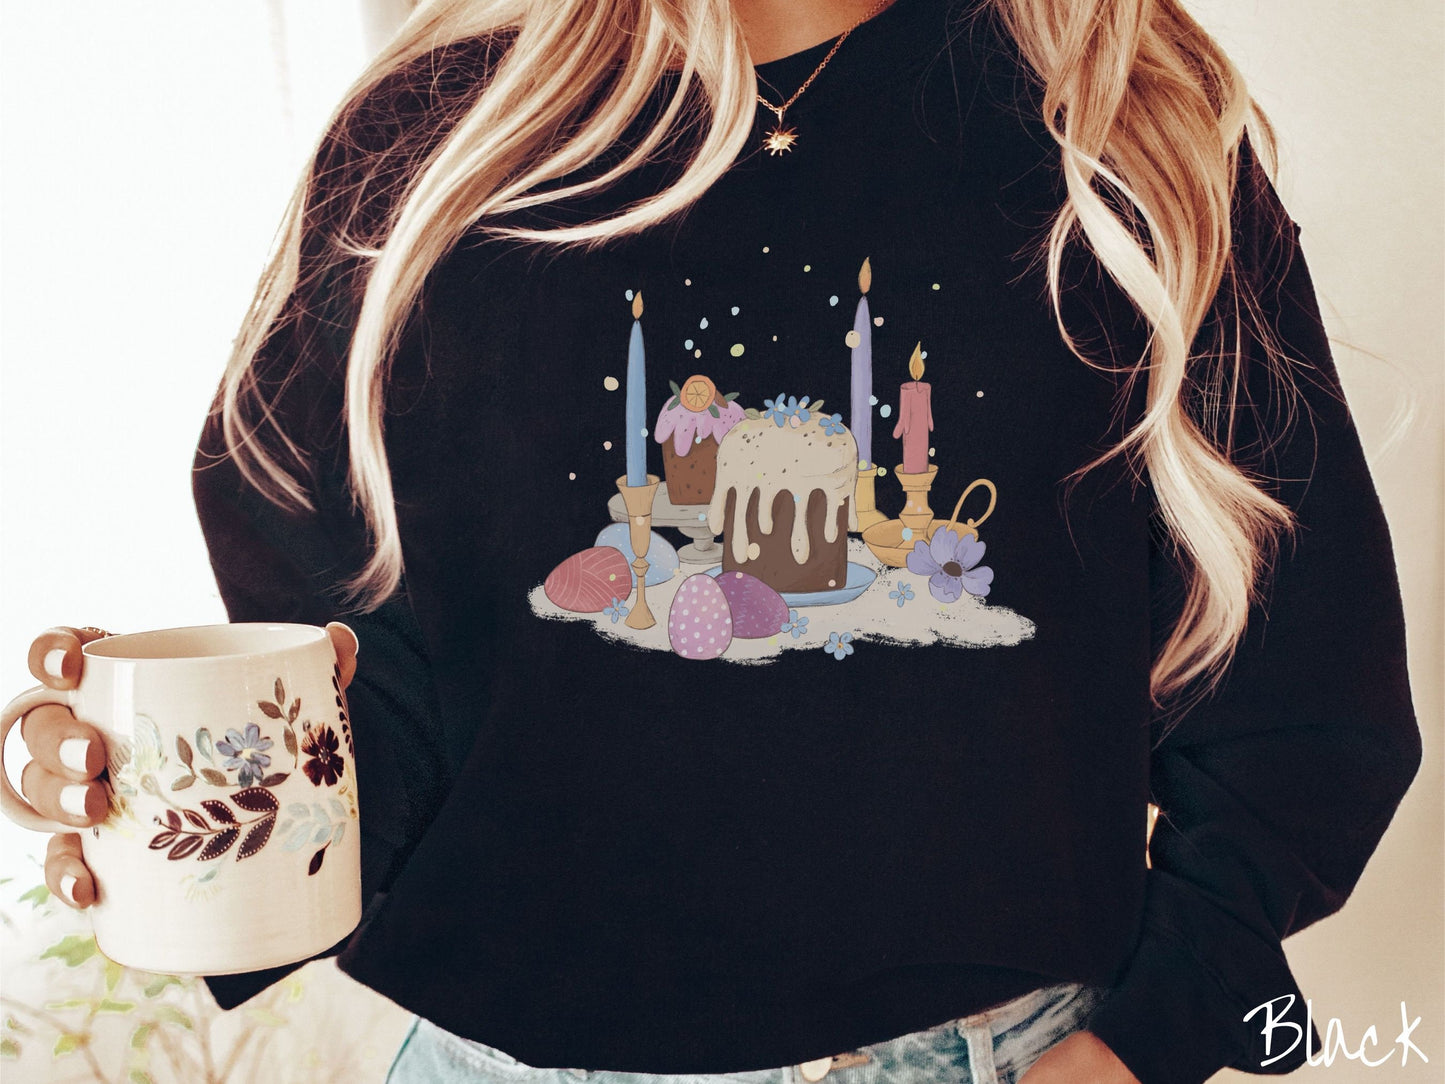 A woman wearing a cute, vintage black colored sweatshirt with an assortment of colorful candles with wax running down the sides in the center, scattered around the candles are pink, purple, red, and blue colored Easter eggs.